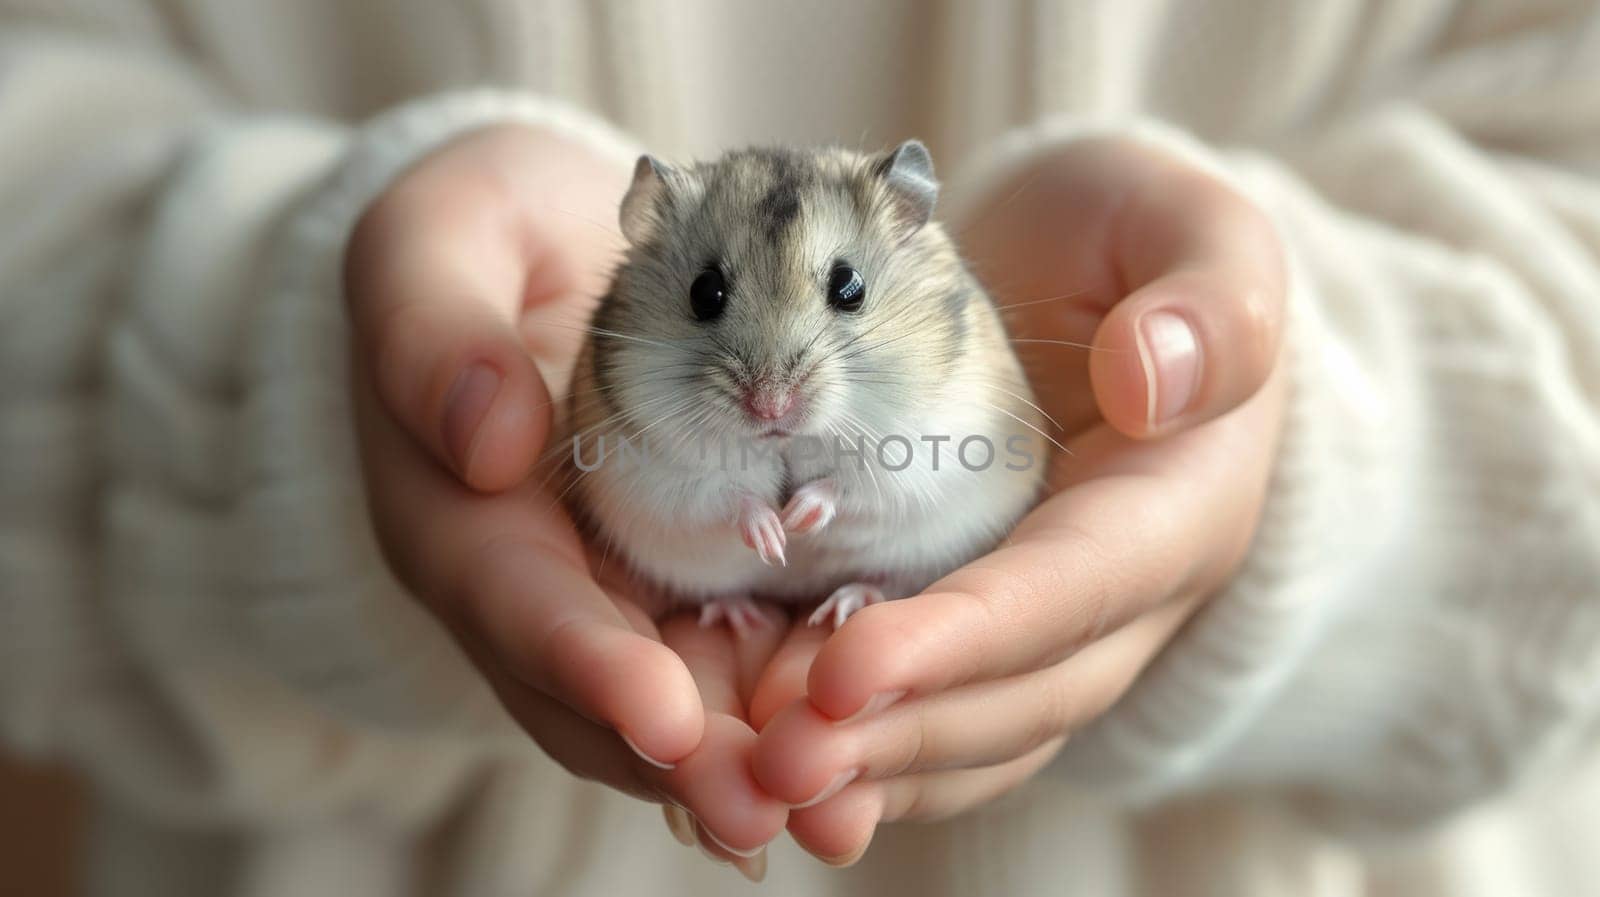 A person holding a small hamster in their hands, AI by starush